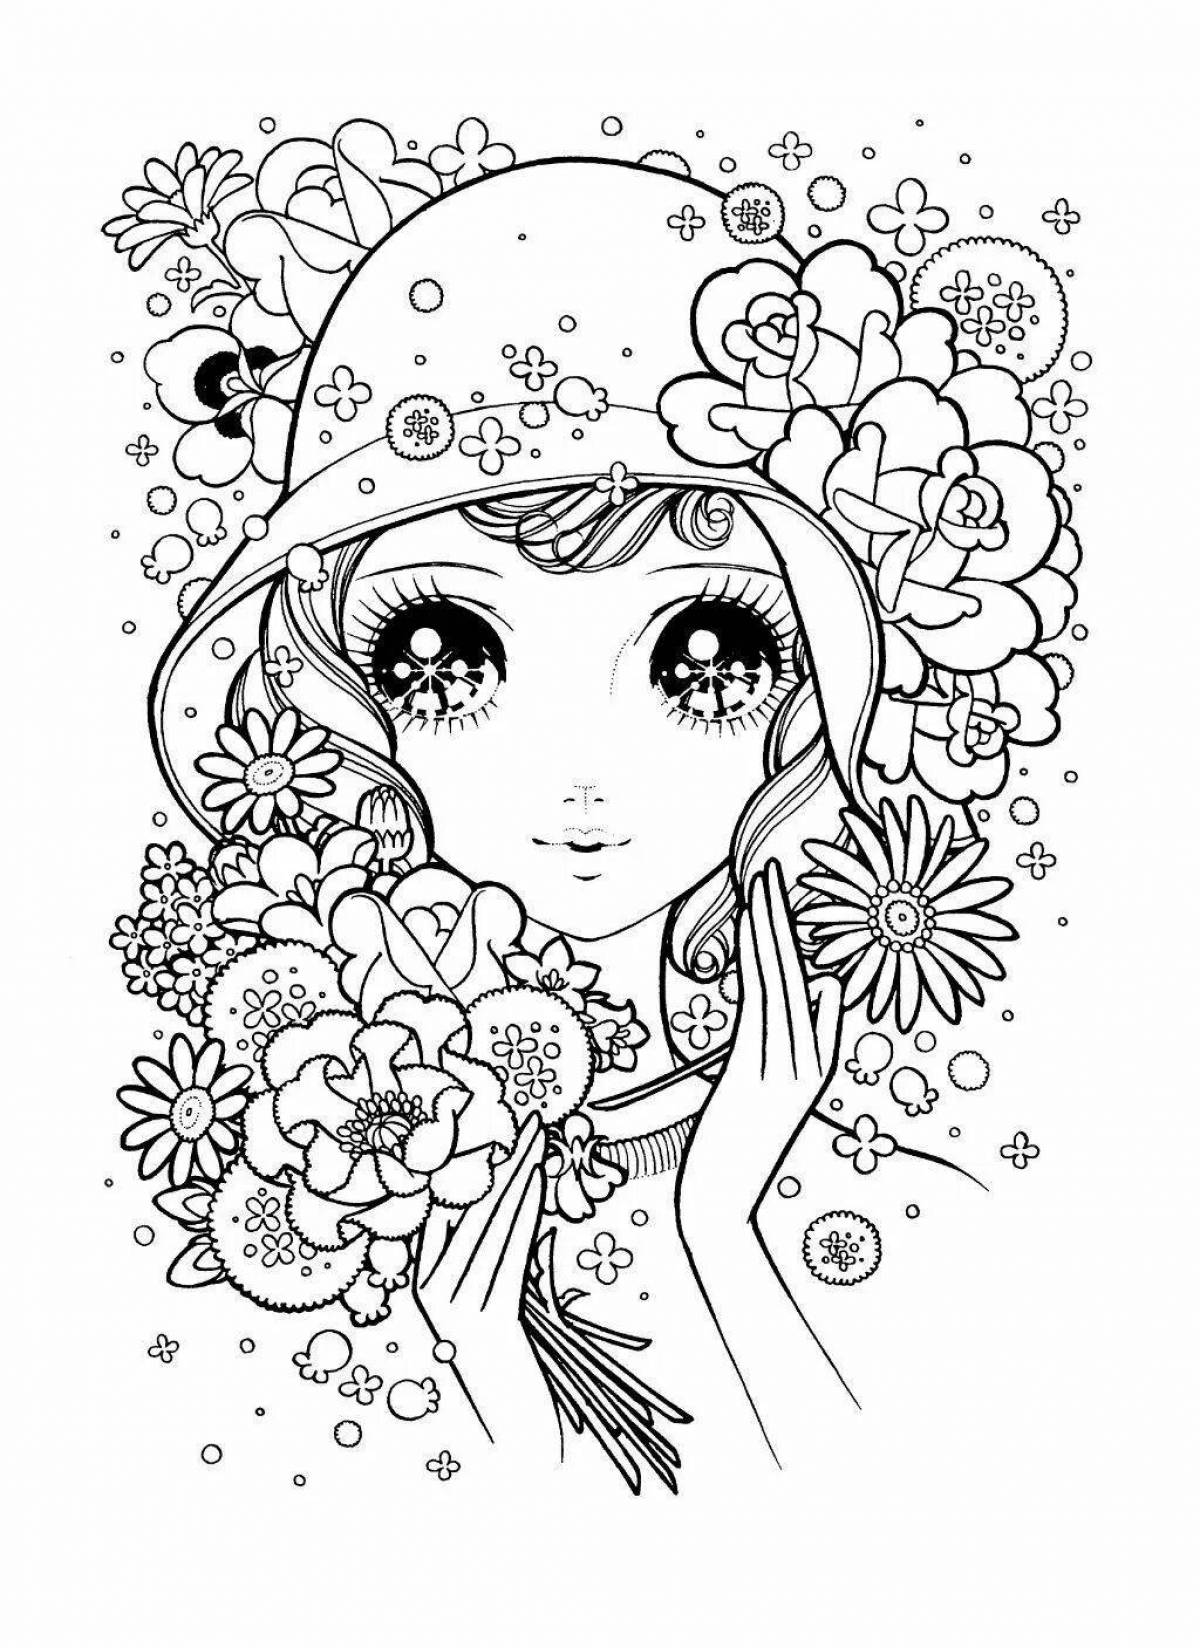 Fun coloring book for girls 8-11 years old